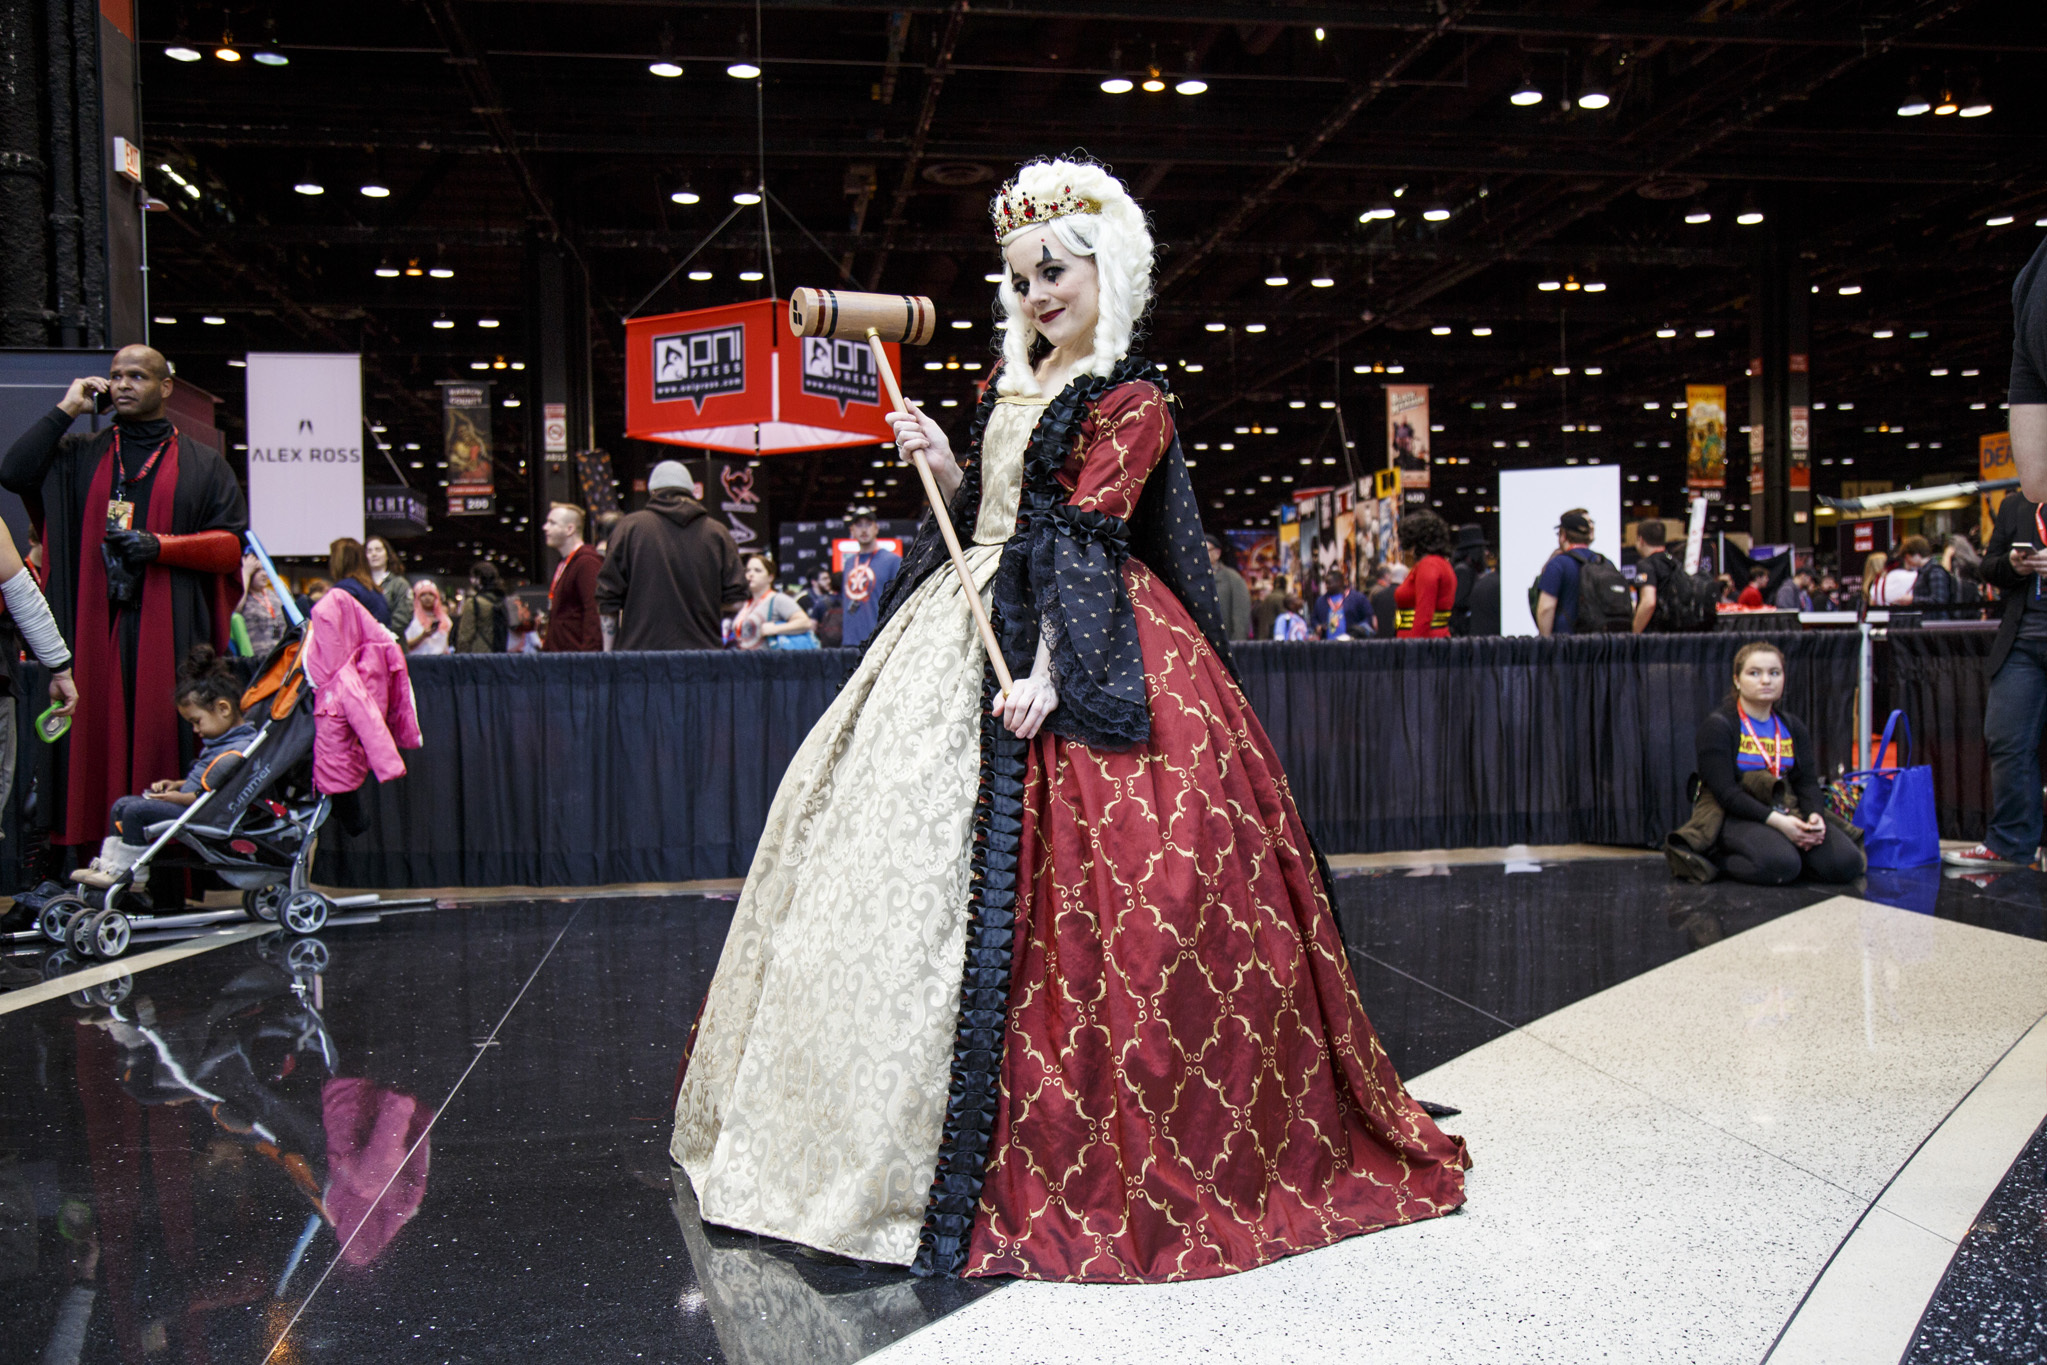 The most amazing costumes we spotted at C2E2 2018